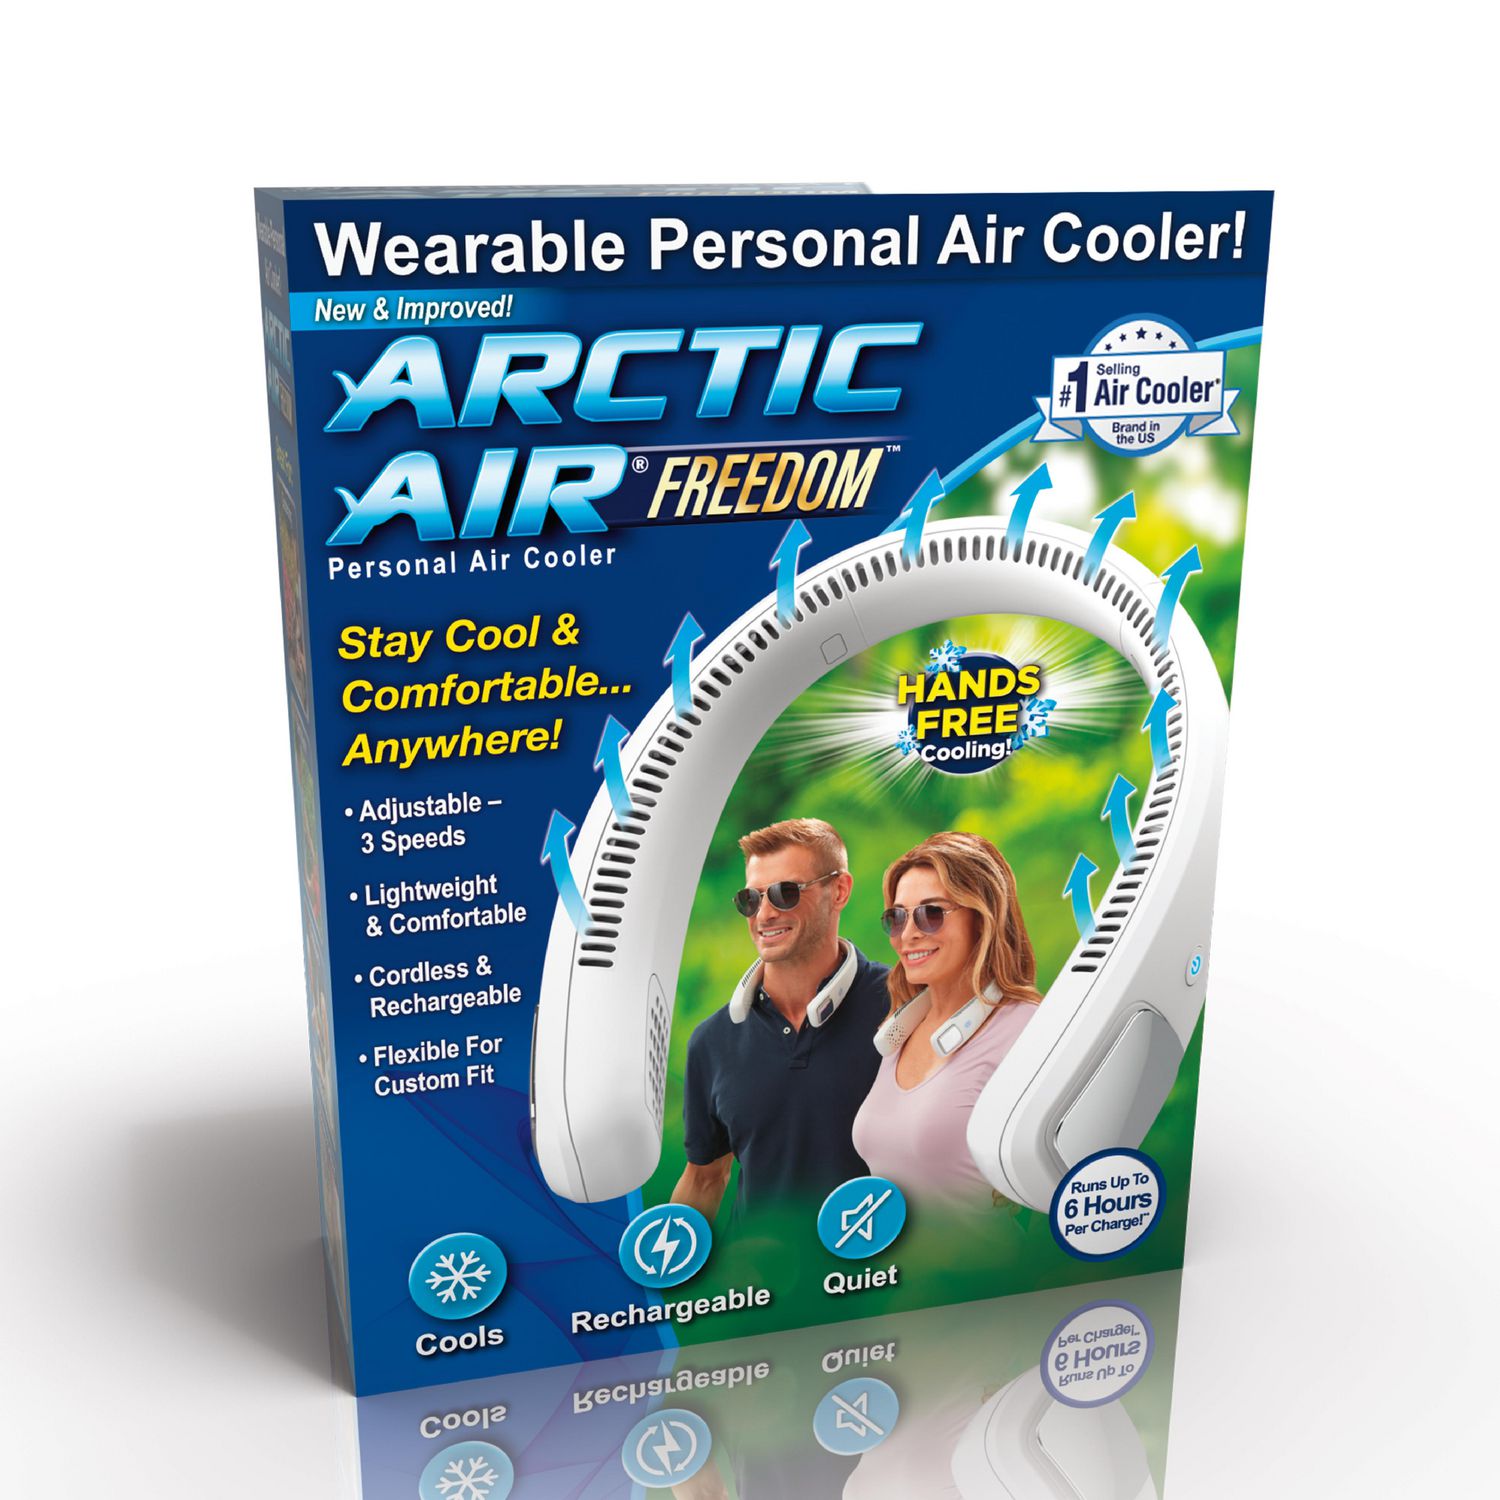 Arctic Air, Portable in Home Air Cooler As Seen on TV